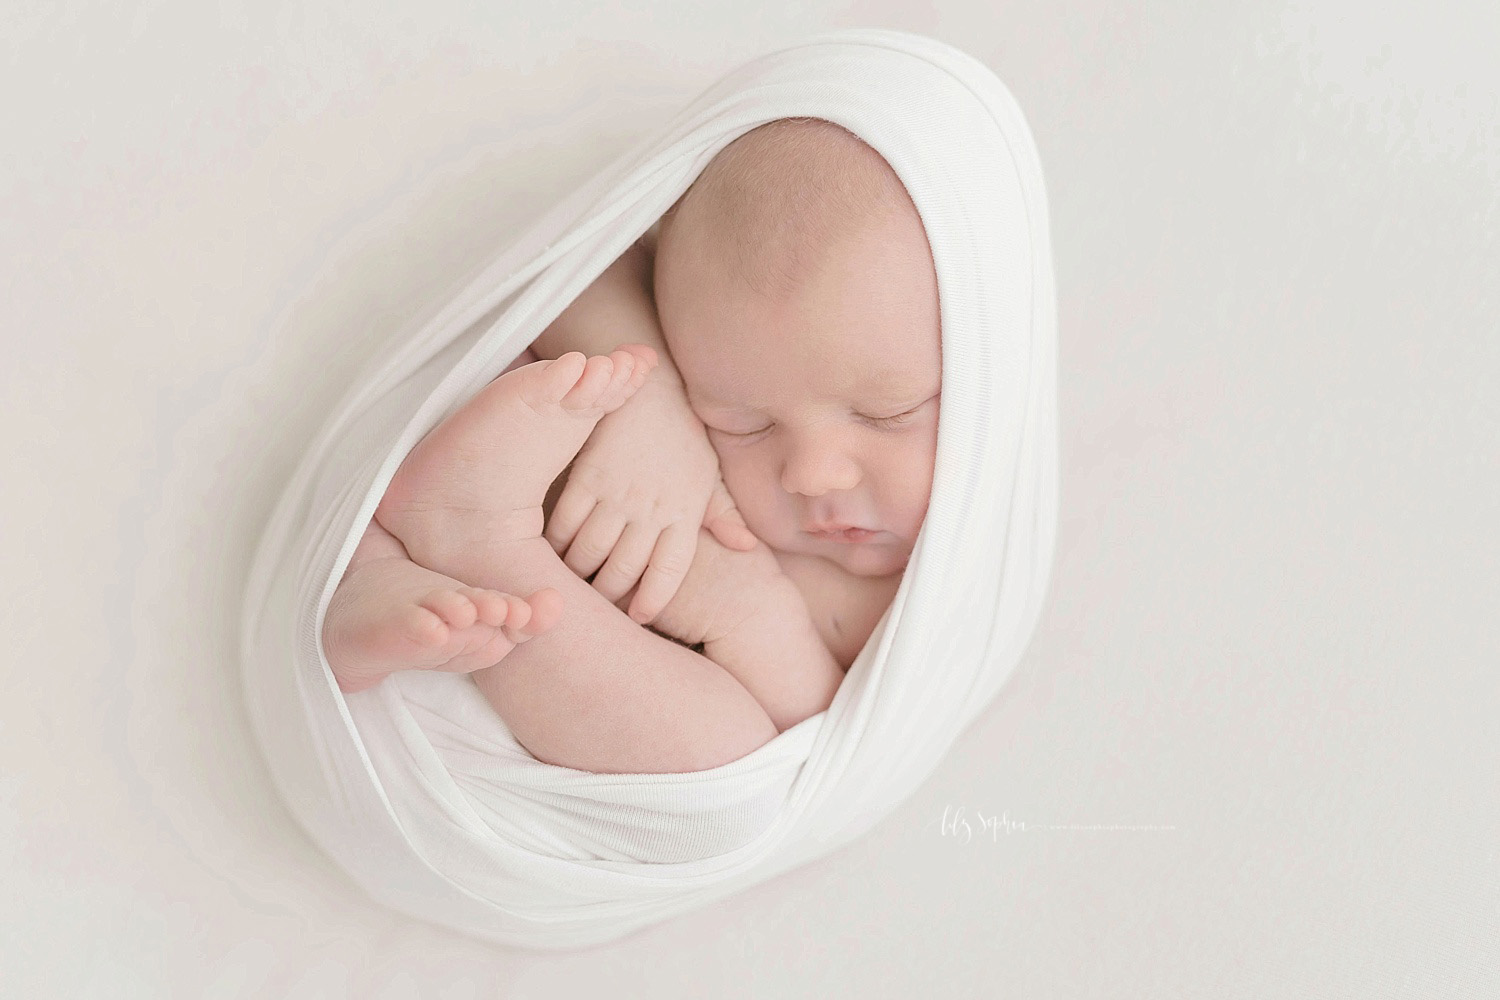  Image of a sleeping, newborn, boy, wrapped up in a white blanket in the egg pose.&nbsp; 